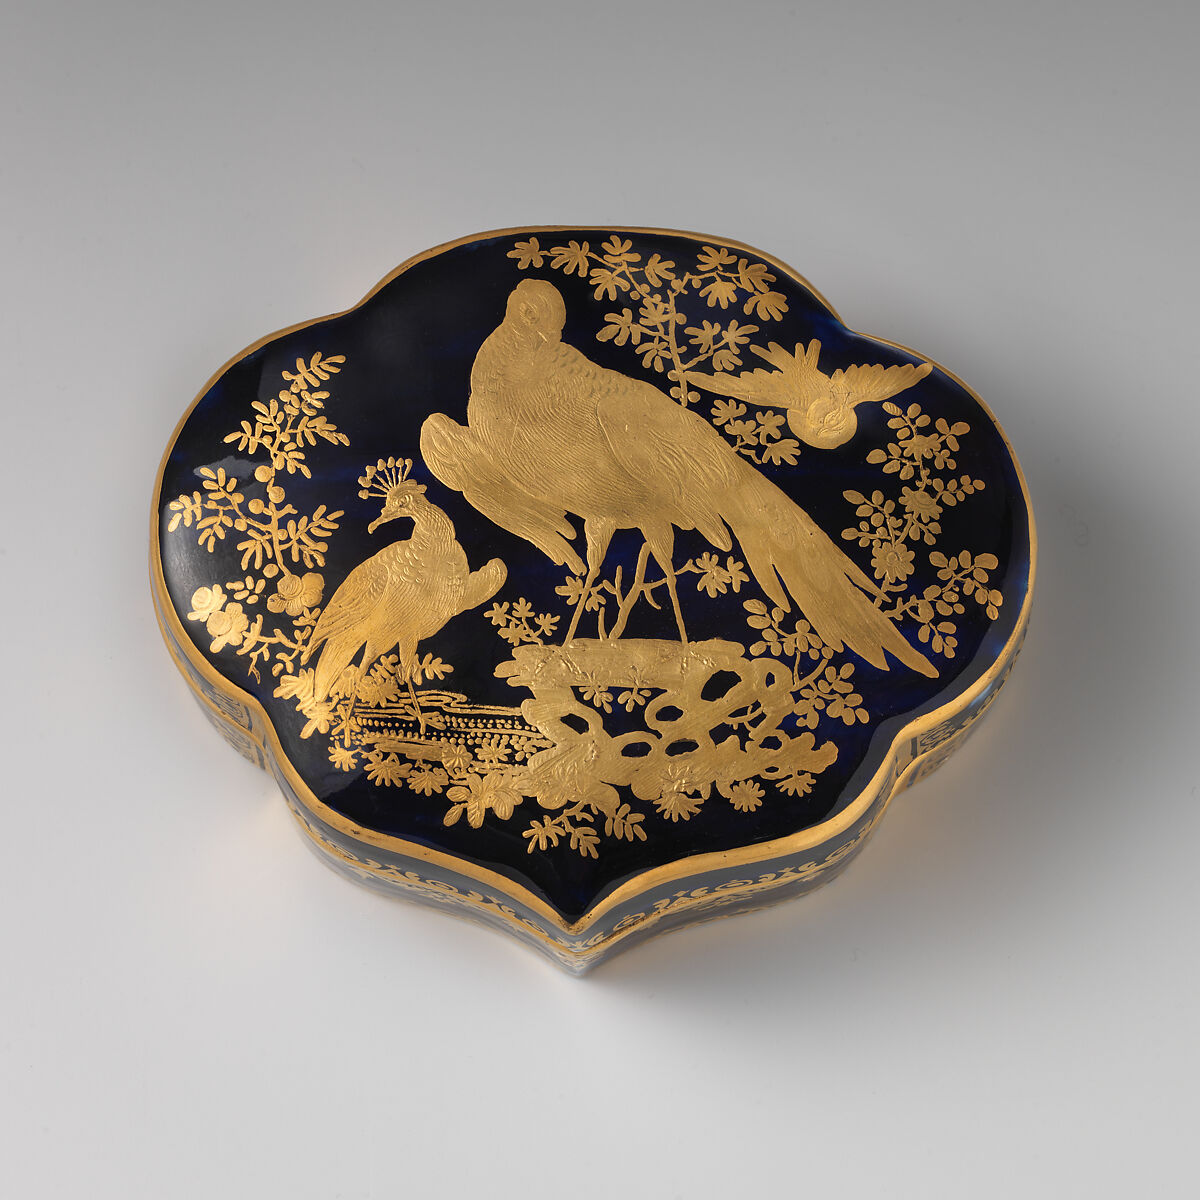 Toilet set containing three smaller boxes, Chelsea Porcelain Manufactory (British, 1744–1784), Soft-paste porcelain, Mazarin blue ground with gold decoration, British, Chelsea 